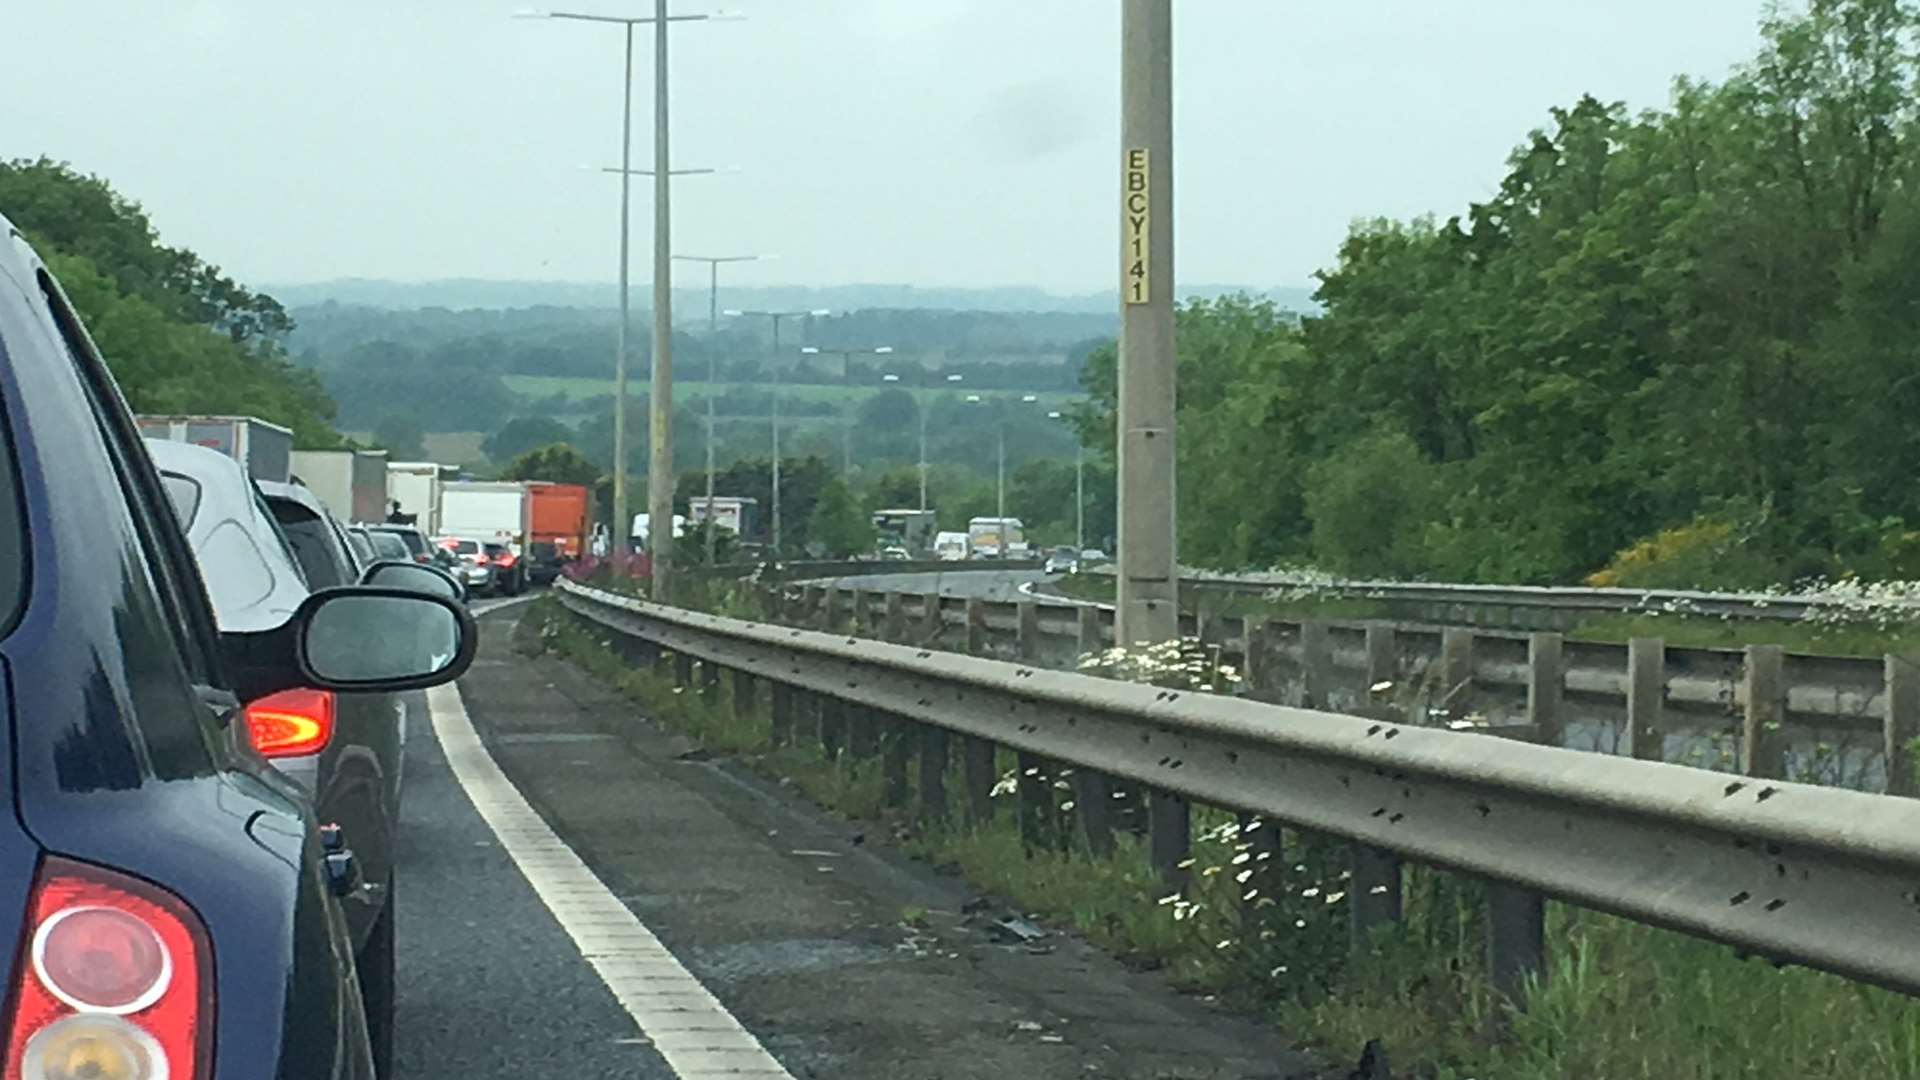 Traffic is queuing on the A2 and M2 approaching Brenley Corner.